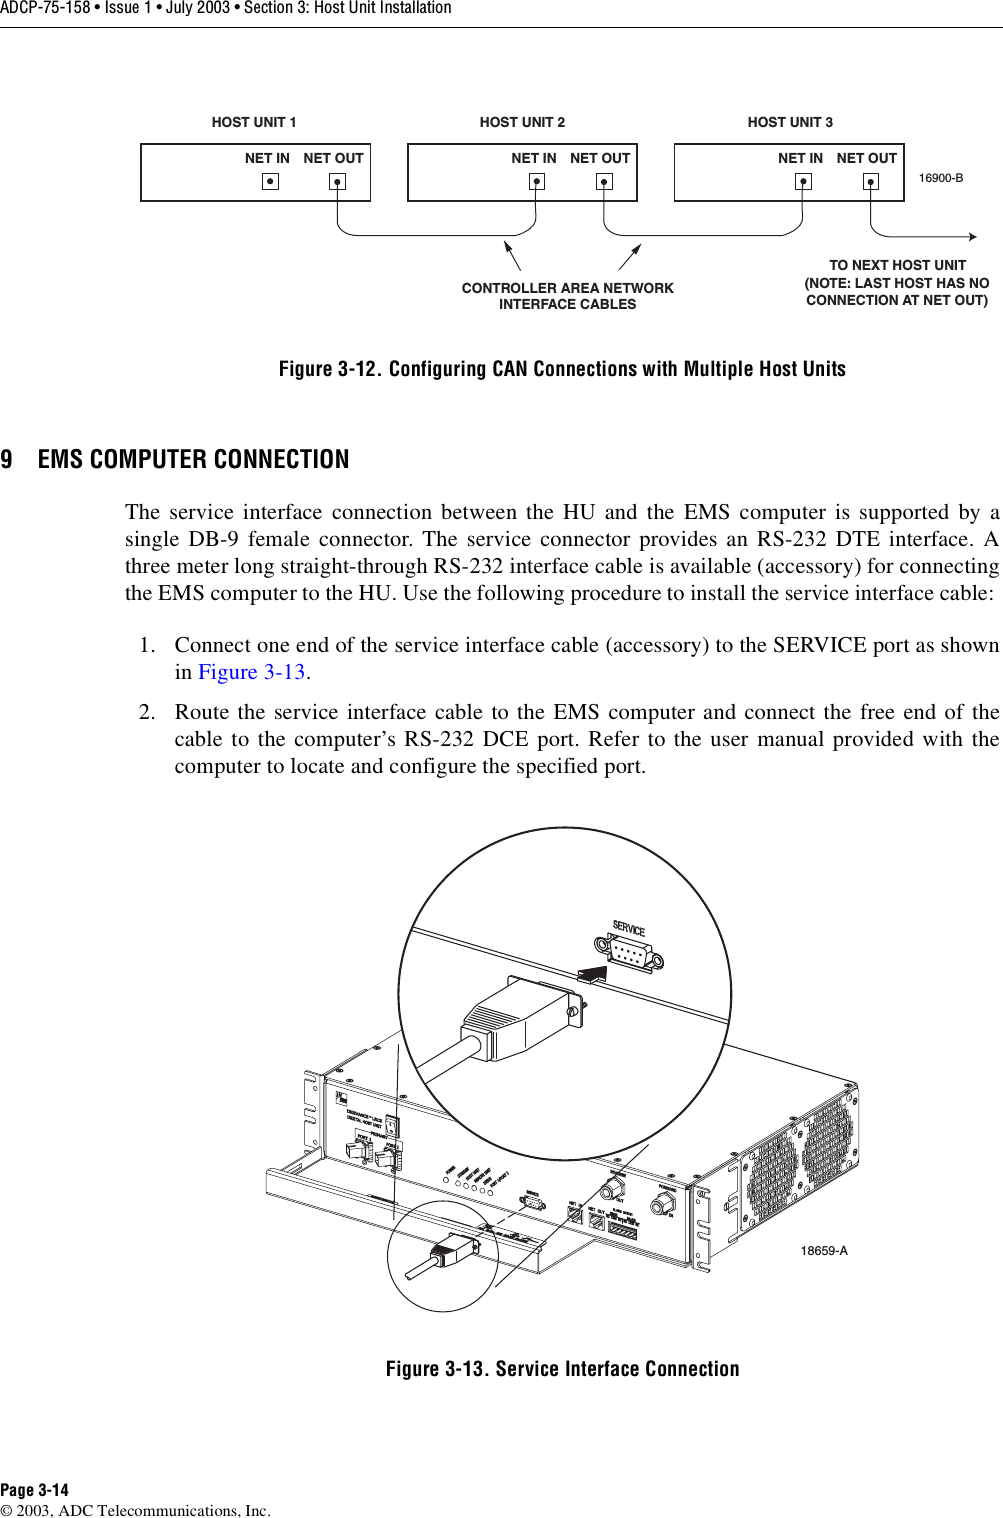 ADCP-75-158 • Issue 1 • July 2003 • Section 3: Host Unit InstallationPage 3-14© 2003, ADC Telecommunications, Inc.Figure 3-12. Configuring CAN Connections with Multiple Host Units9 EMS COMPUTER CONNECTIONThe service interface connection between the HU and the EMS computer is supported by asingle DB-9 female connector. The service connector provides an RS-232 DTE interface. Athree meter long straight-through RS-232 interface cable is available (accessory) for connectingthe EMS computer to the HU. Use the following procedure to install the service interface cable: 1. Connect one end of the service interface cable (accessory) to the SERVICE port as shownin Figure 3-13. 2. Route the service interface cable to the EMS computer and connect the free end of thecable to the computer’s RS-232 DCE port. Refer to the user manual provided with thecomputer to locate and configure the specified port. Figure 3-13. Service Interface ConnectionHOST UNIT 1 HOST UNIT 2 HOST UNIT 3NET IN NET OUT NET IN NET OUT NET IN NET OUT16900-BCONTROLLER AREA NETWORKINTERFACE CABLESTO NEXT HOST UNIT(NOTE: LAST HOST HAS NOCONNECTION AT NET OUT)18659-A